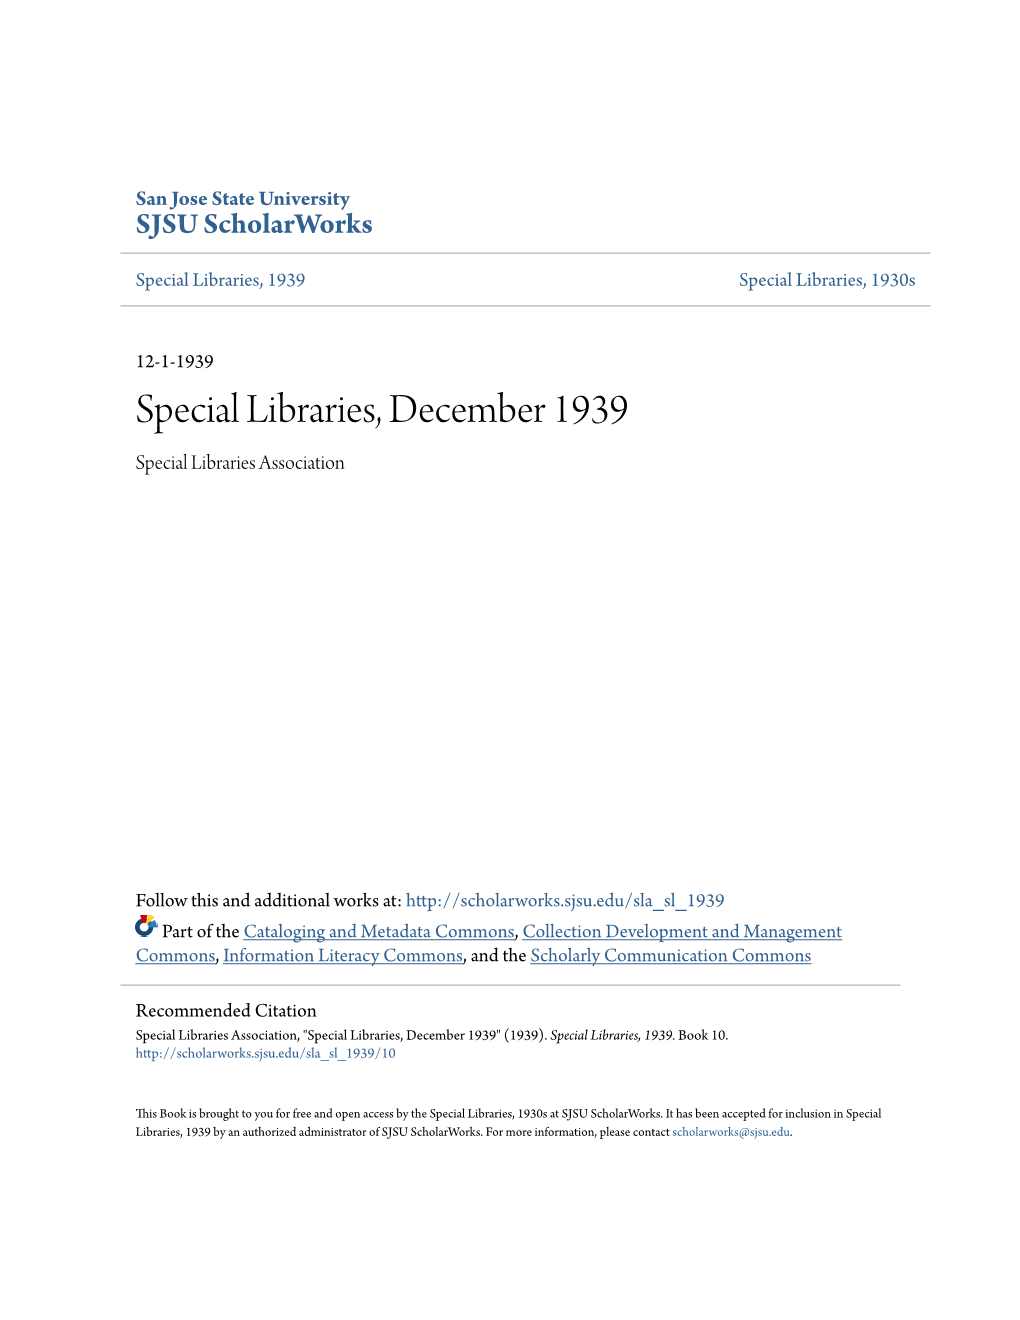 Special Libraries, December 1939 Special Libraries Association